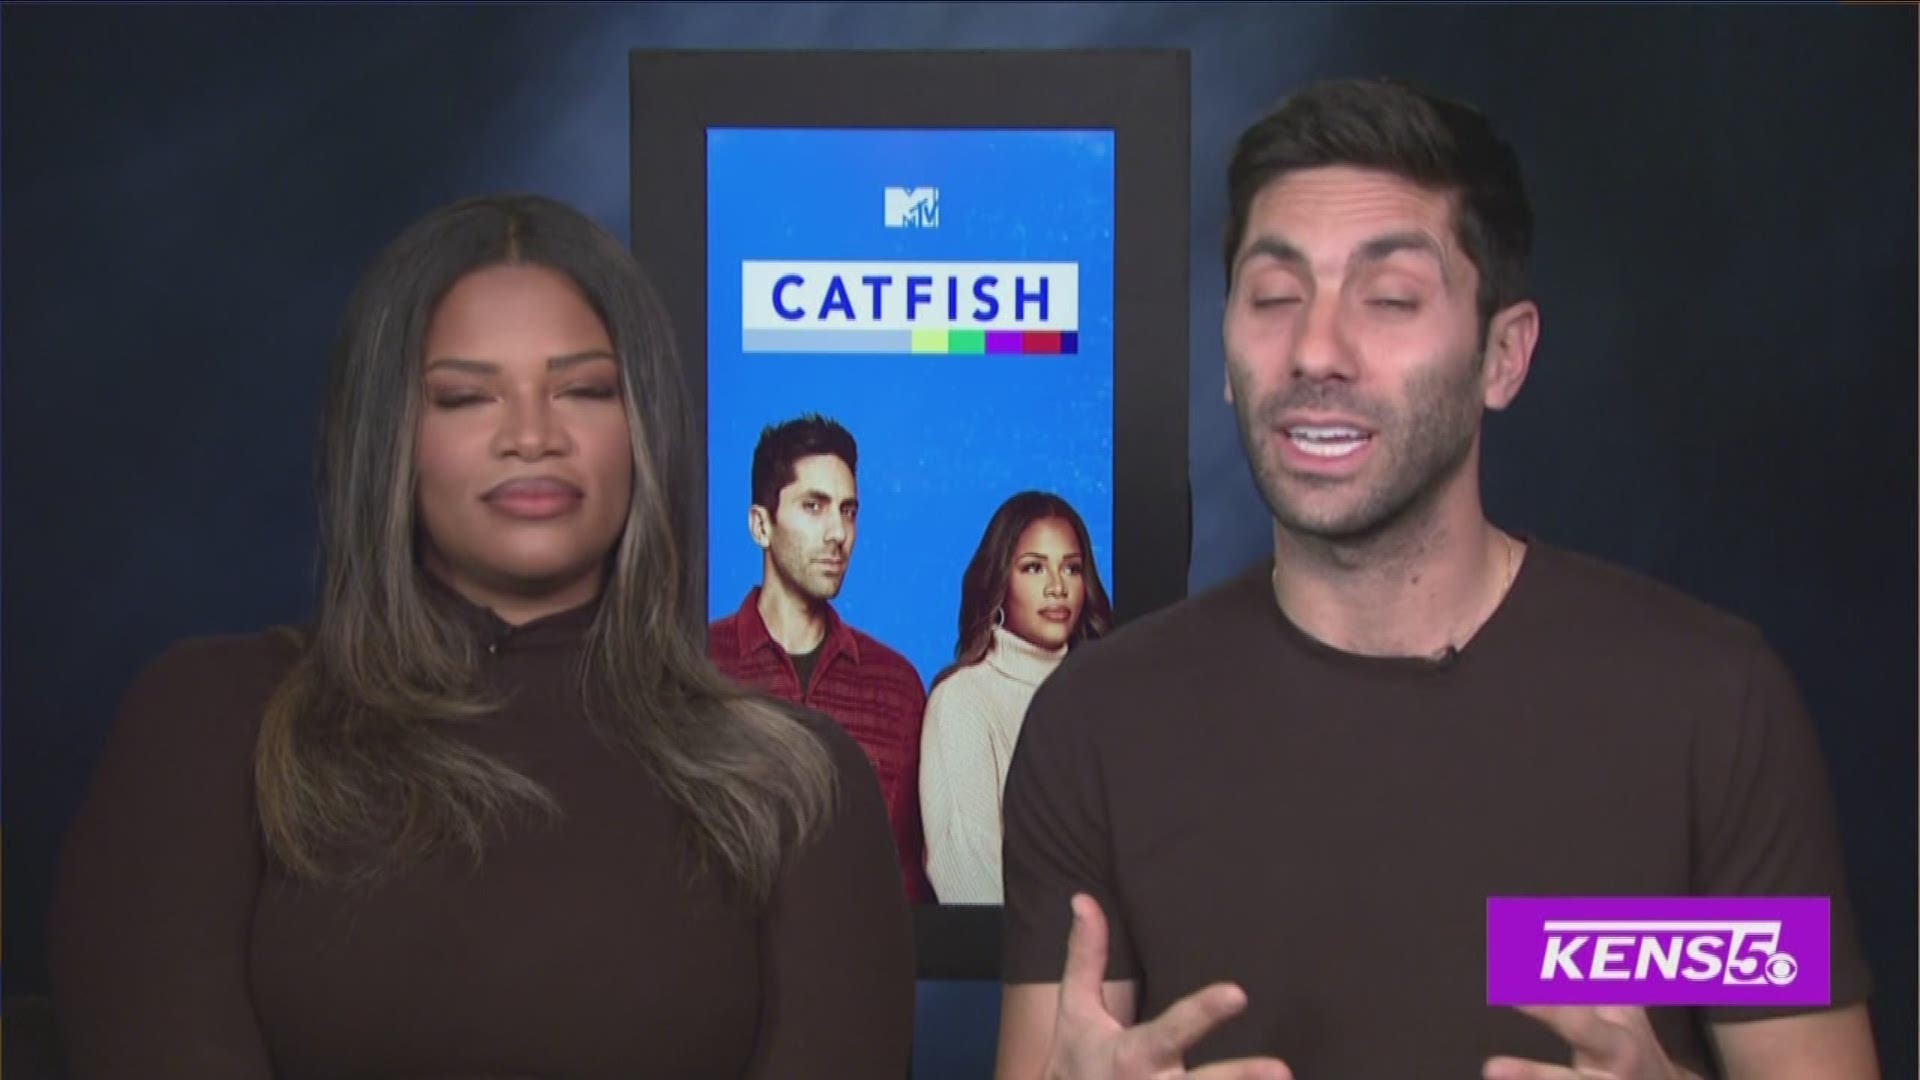 We are talking to the incredible hosts of Catfish about their new and upcoming season!